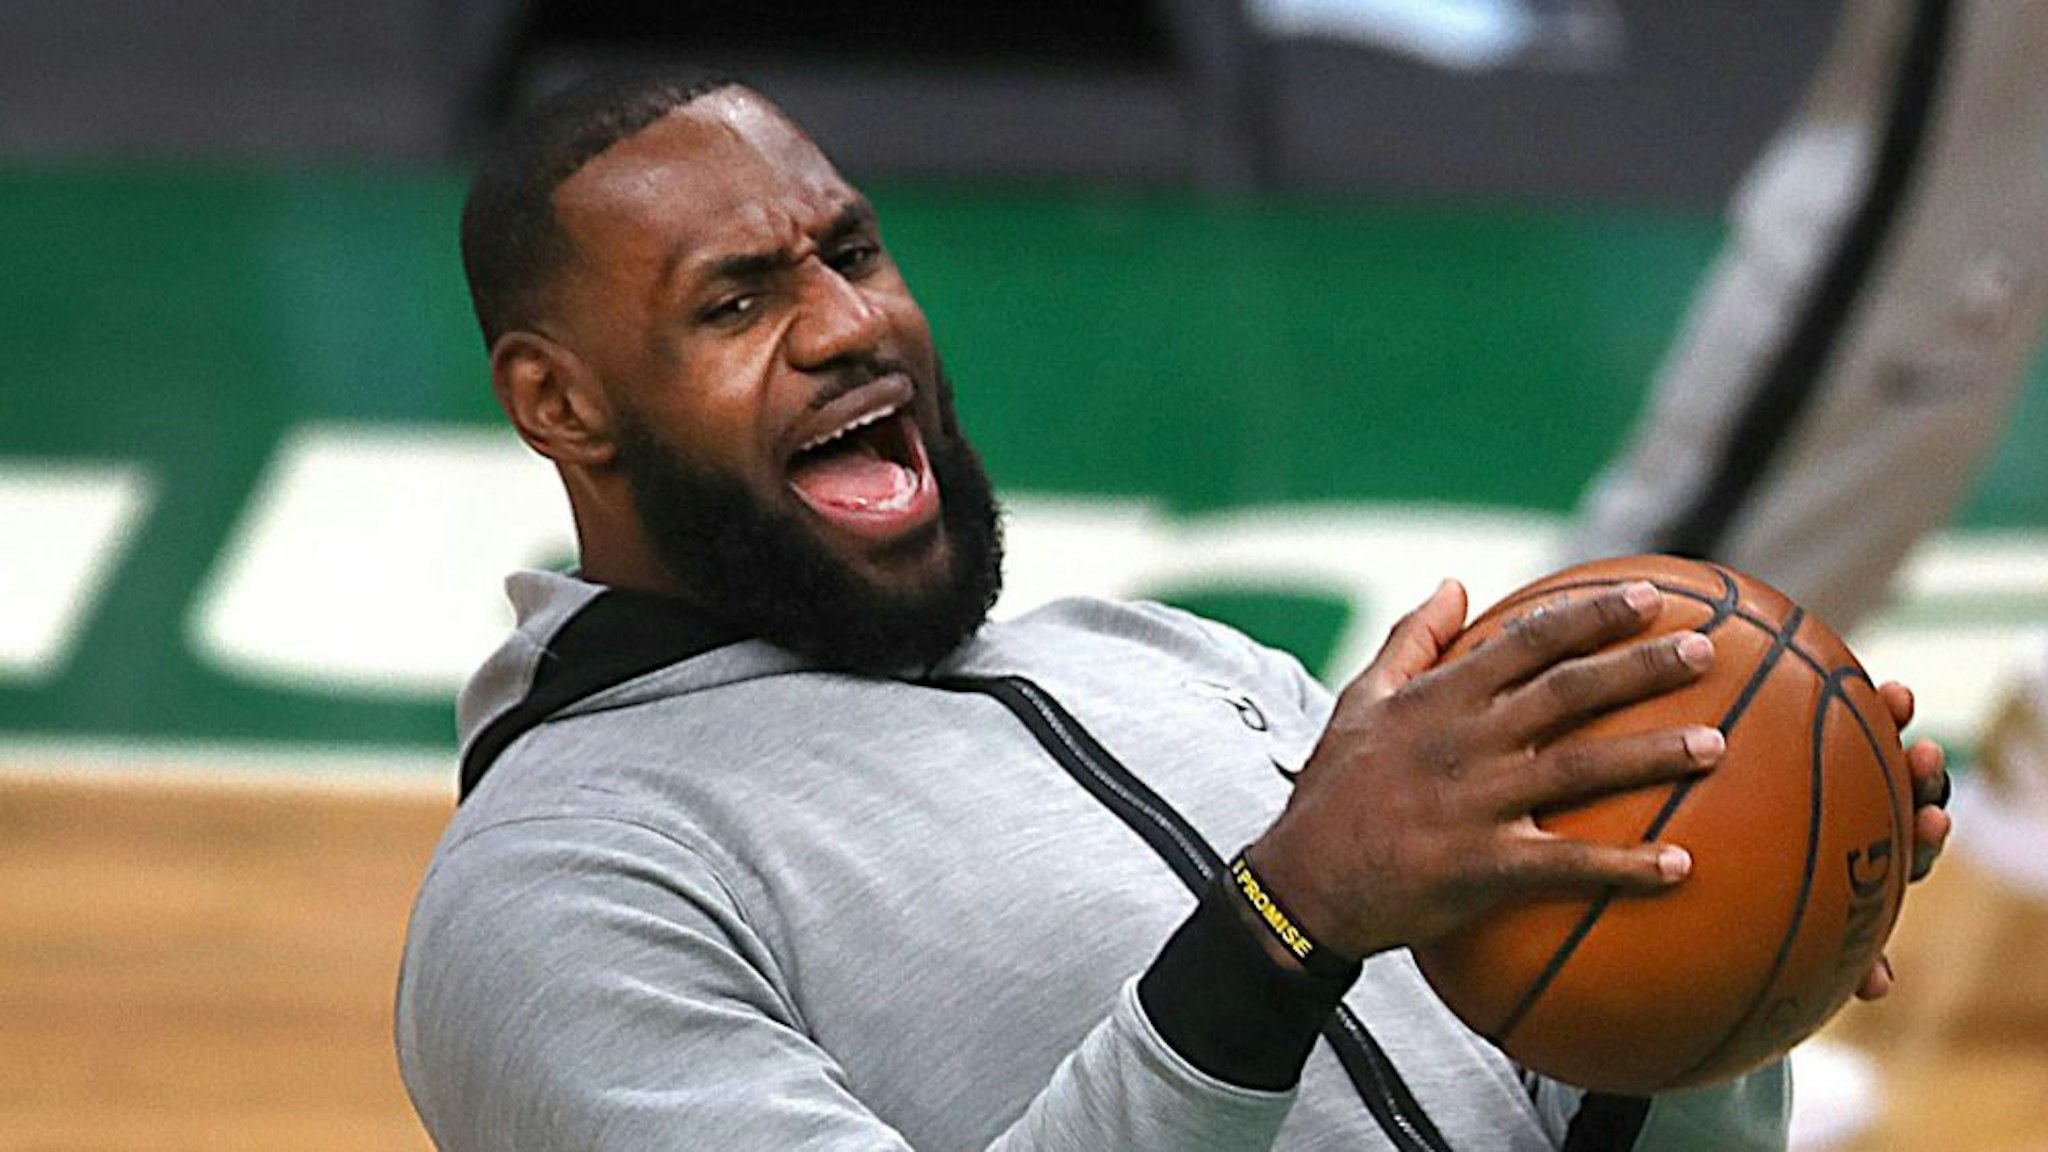 BOSTON - JANUARY 30: Los Angeles Lakers' LeBron James has a laugh in pregame warmups. The Boston Celtics host the Los Angeles Lakers in a regular season NBA game at TD Garden in Boston on Jan. 30, 2021.